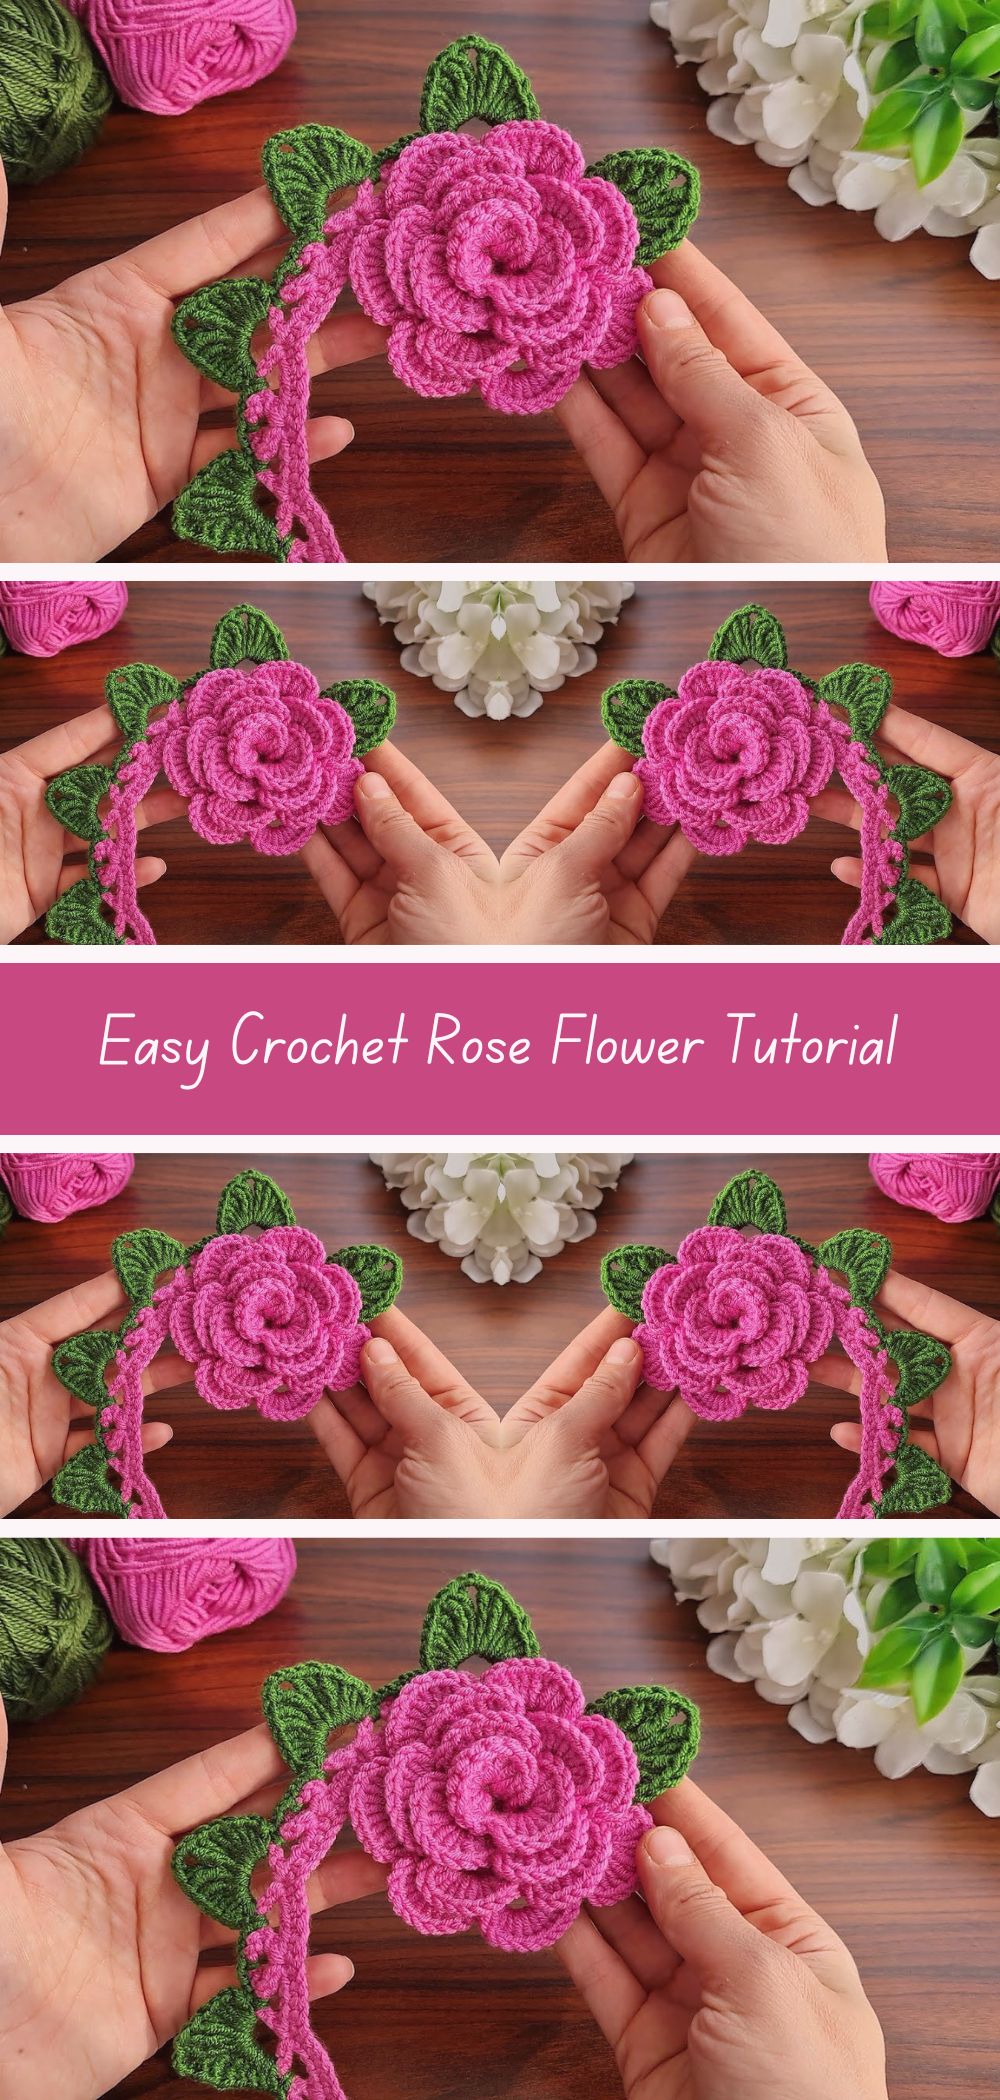 Easy Crochet Rose Flower Tutorial - Learn to crochet beautiful roses with this step-by-step tutorial